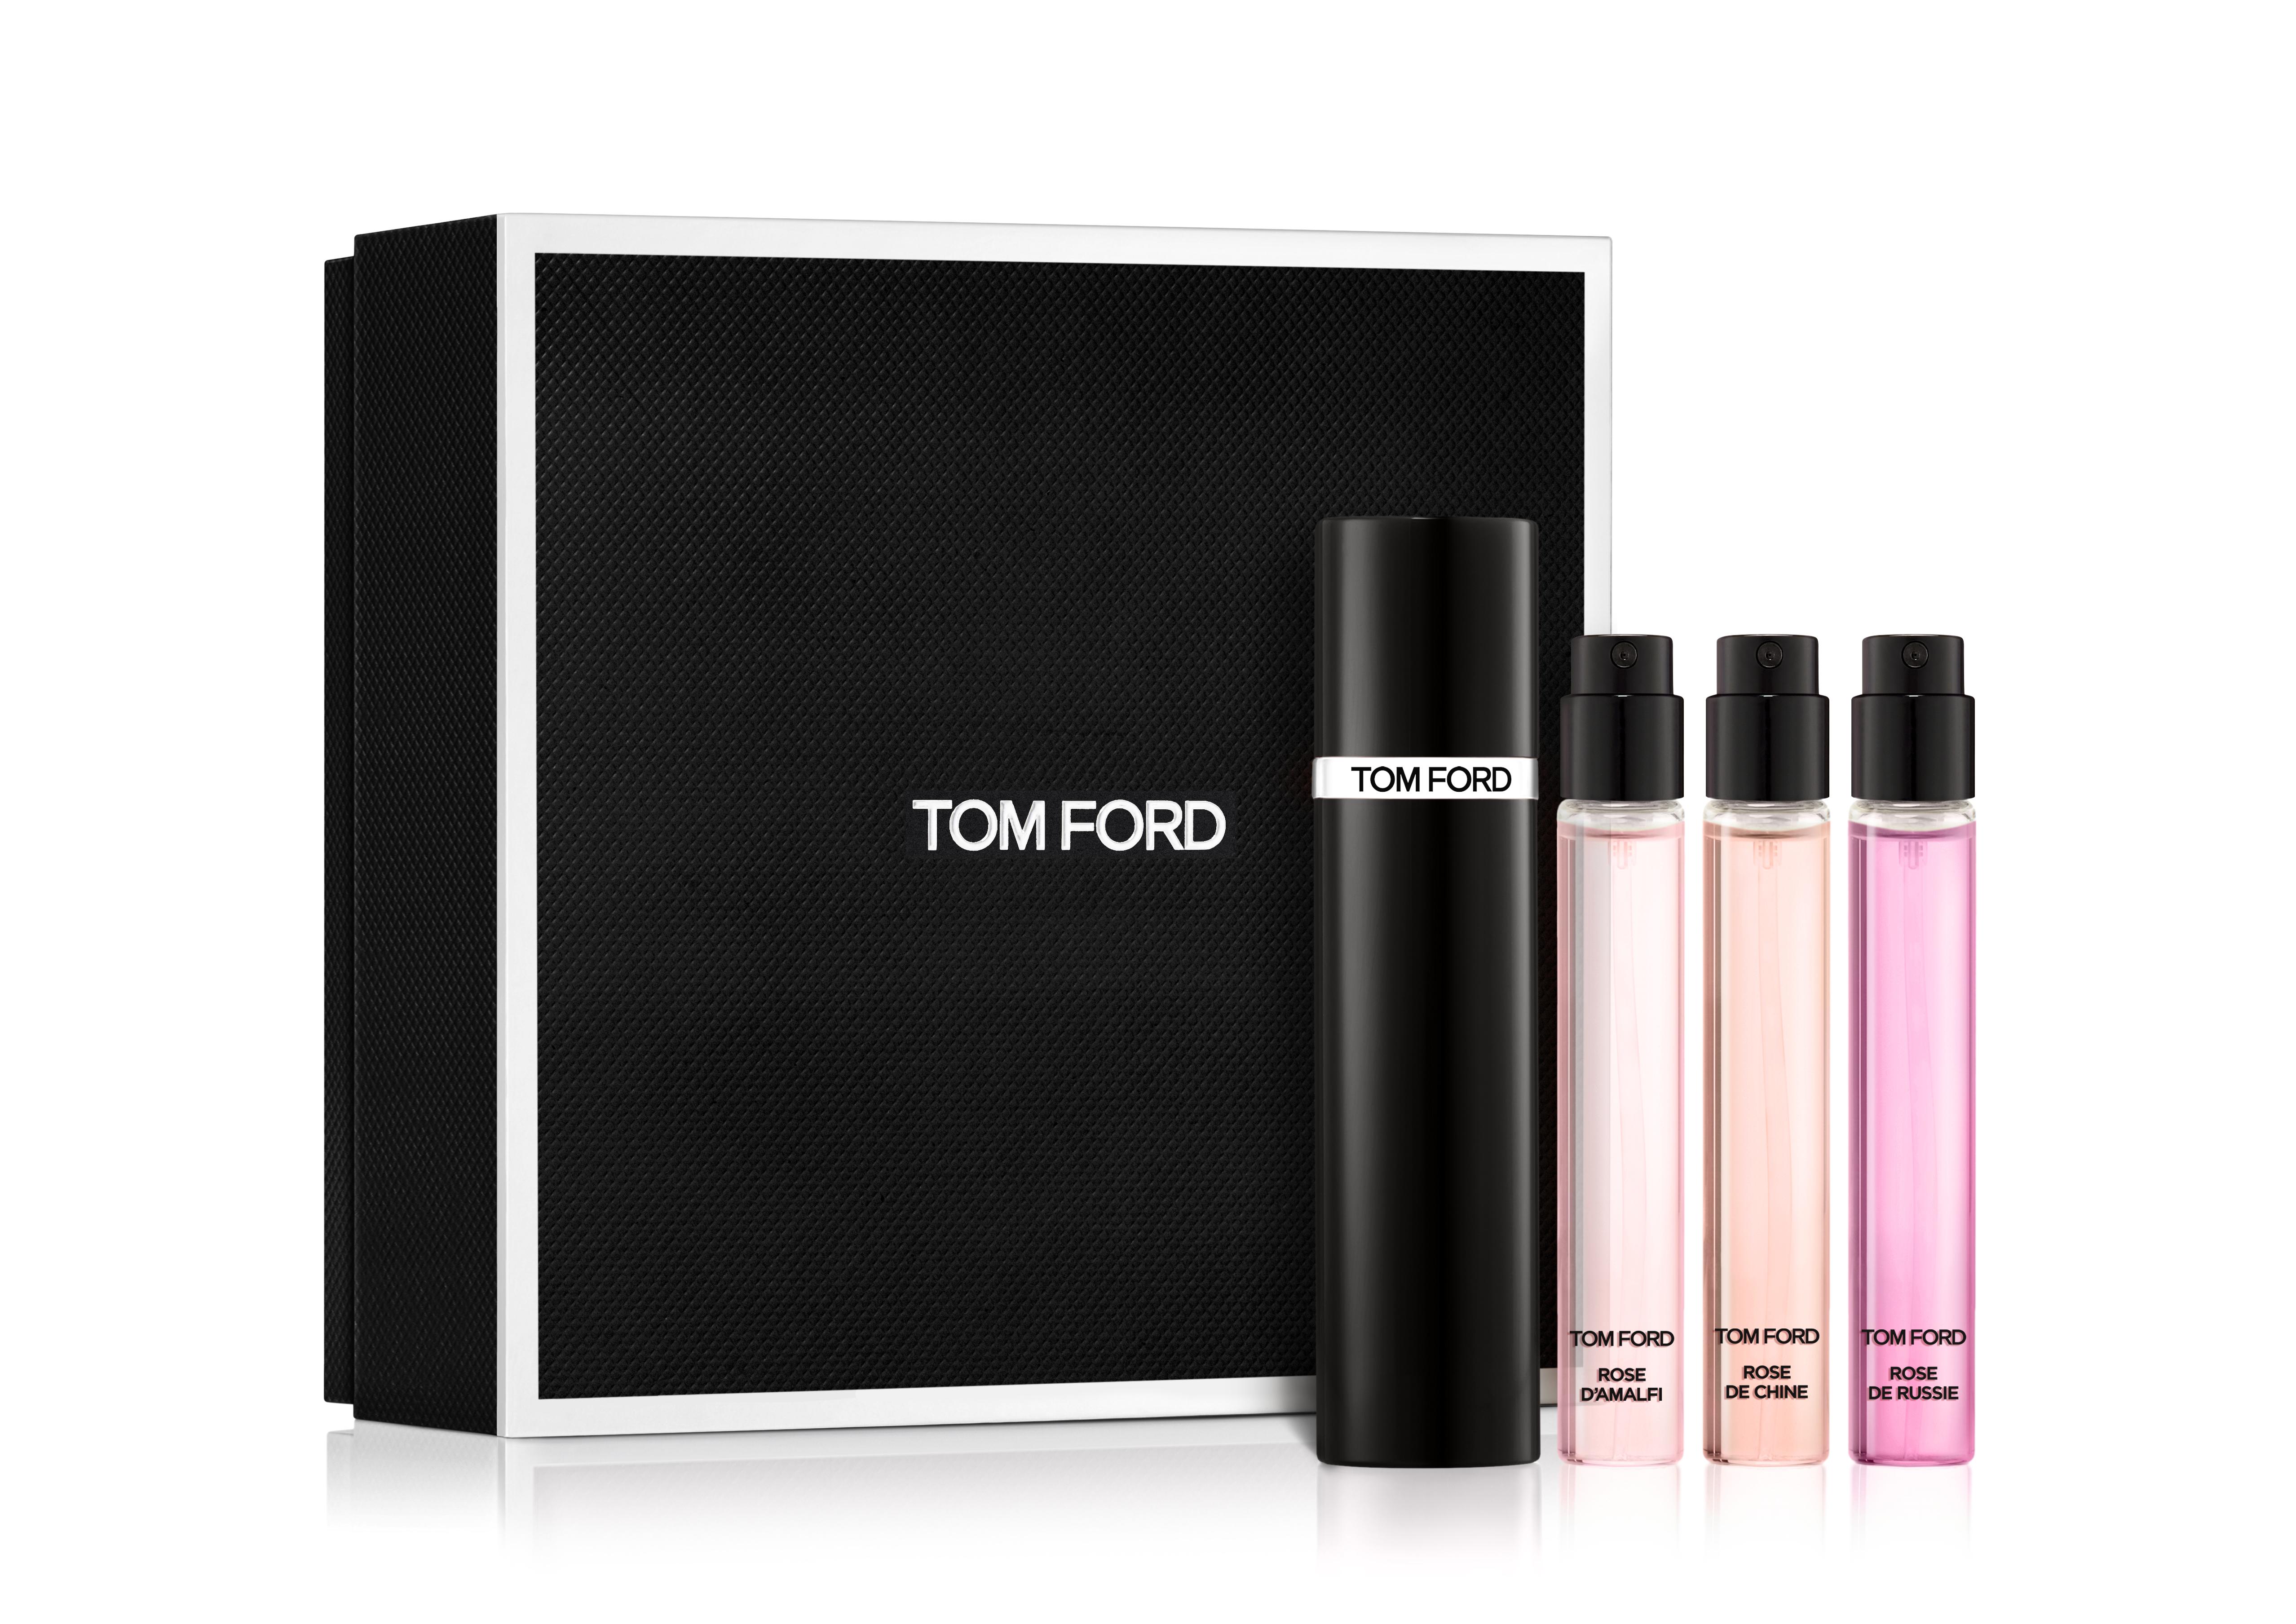 Tom Ford PRIVATE BLEND ROSES EAU DE PARFUM TRAVEL COLLECTION WITH ATOMIZER  - Beauty 